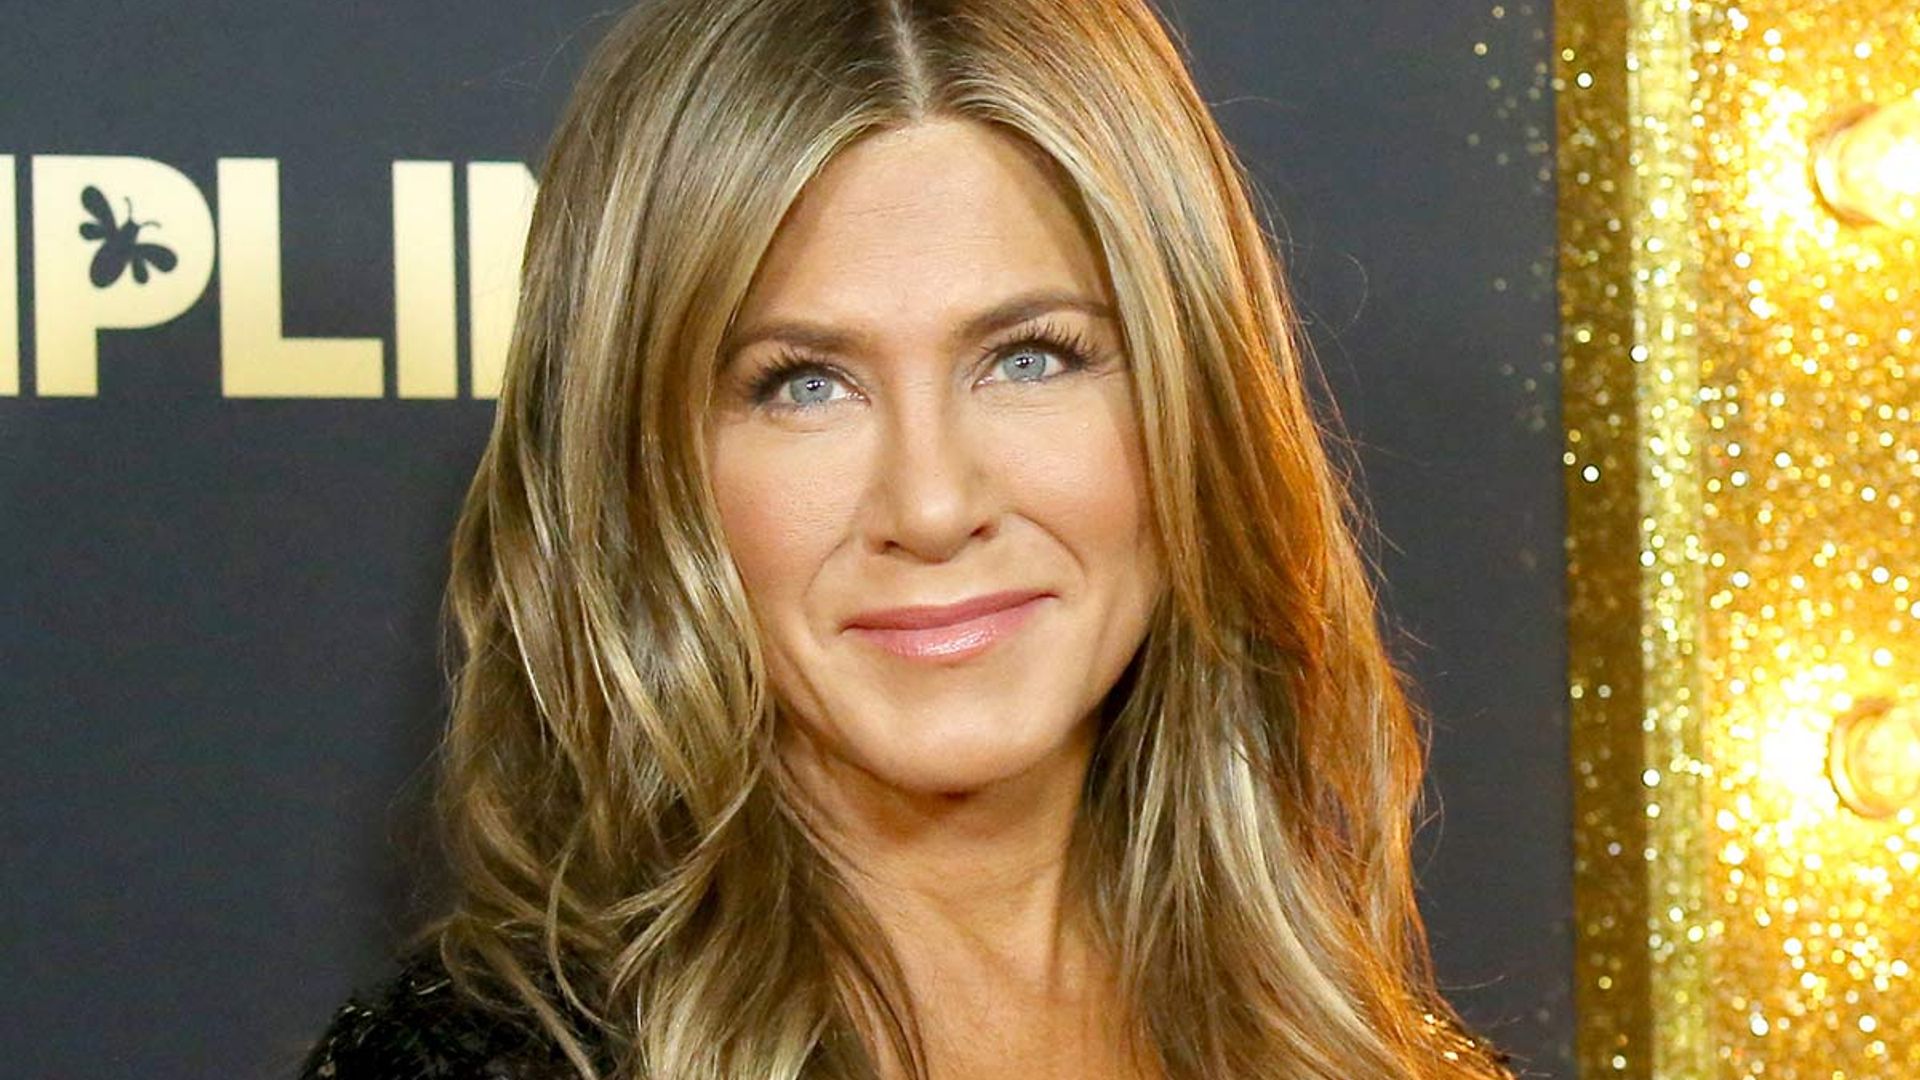 Jennifer Aniston's legs are never-ending in tiny shorts – fans react